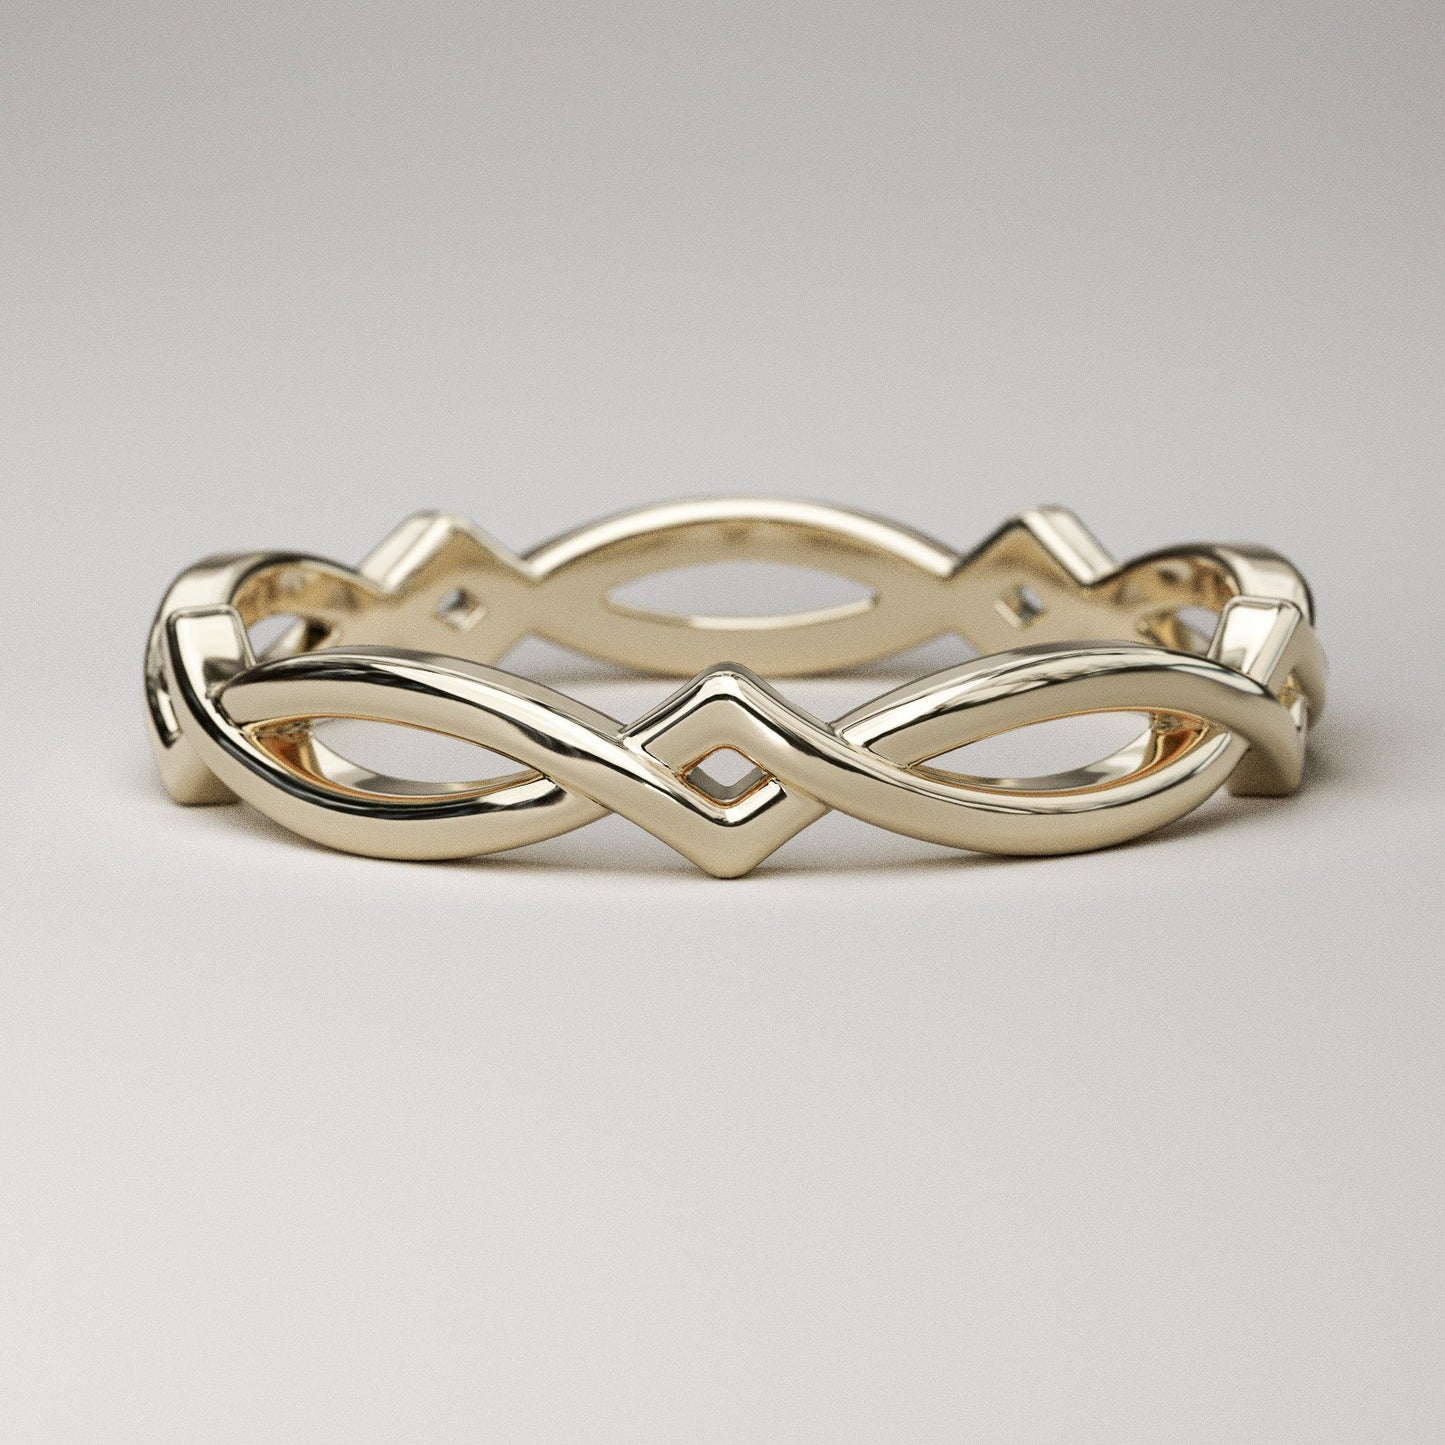 Woven gold band - A Celtic ring in solid yellow gold